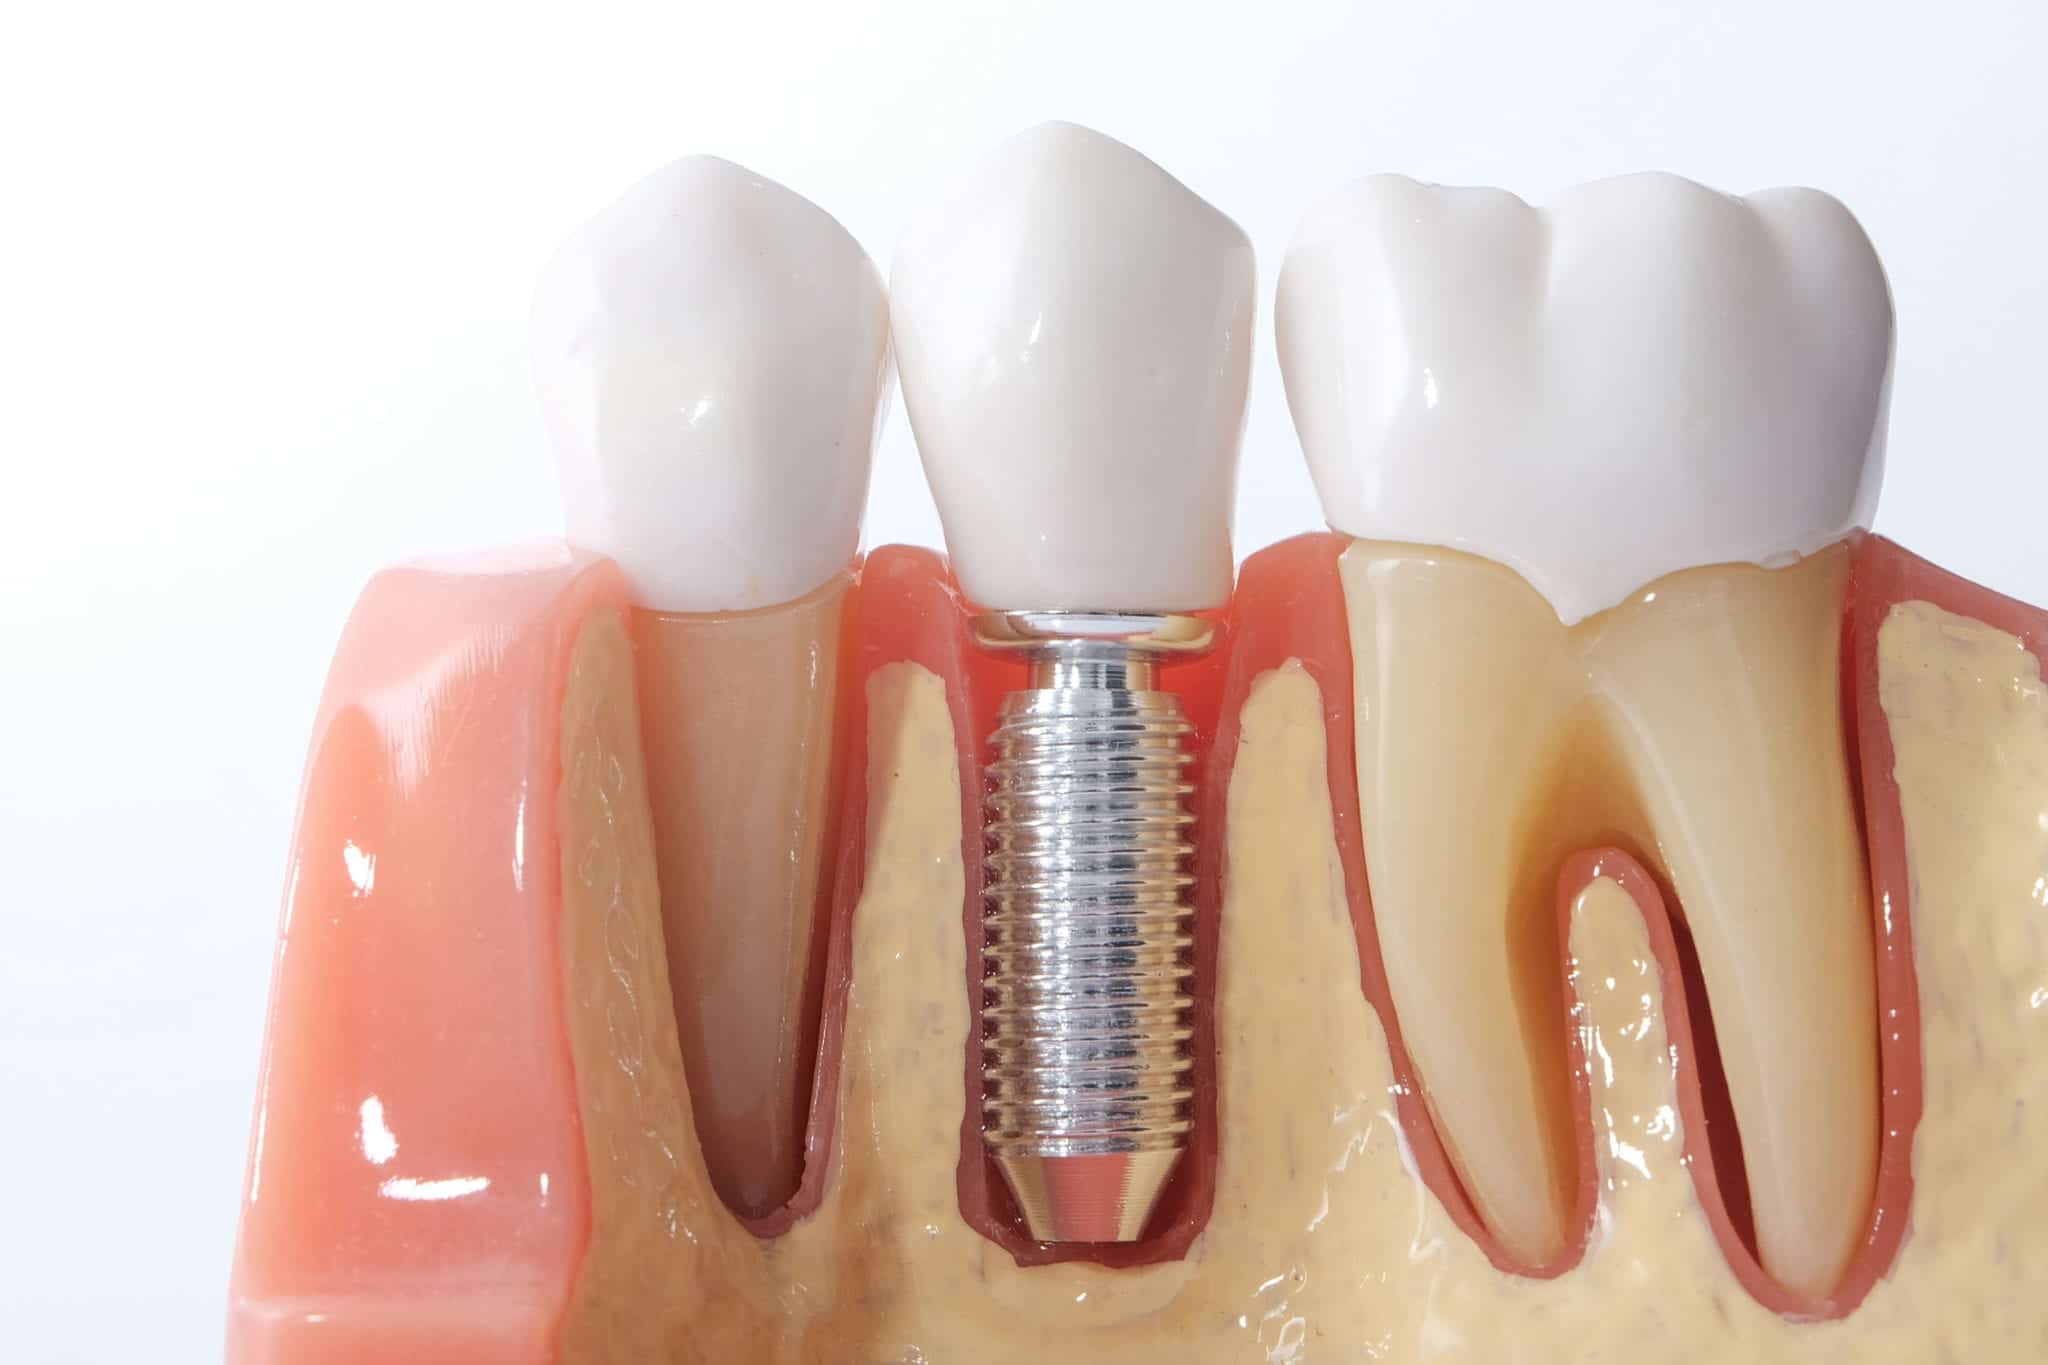 Dental Implants: A Guide to the Most Frequently Asked Questions